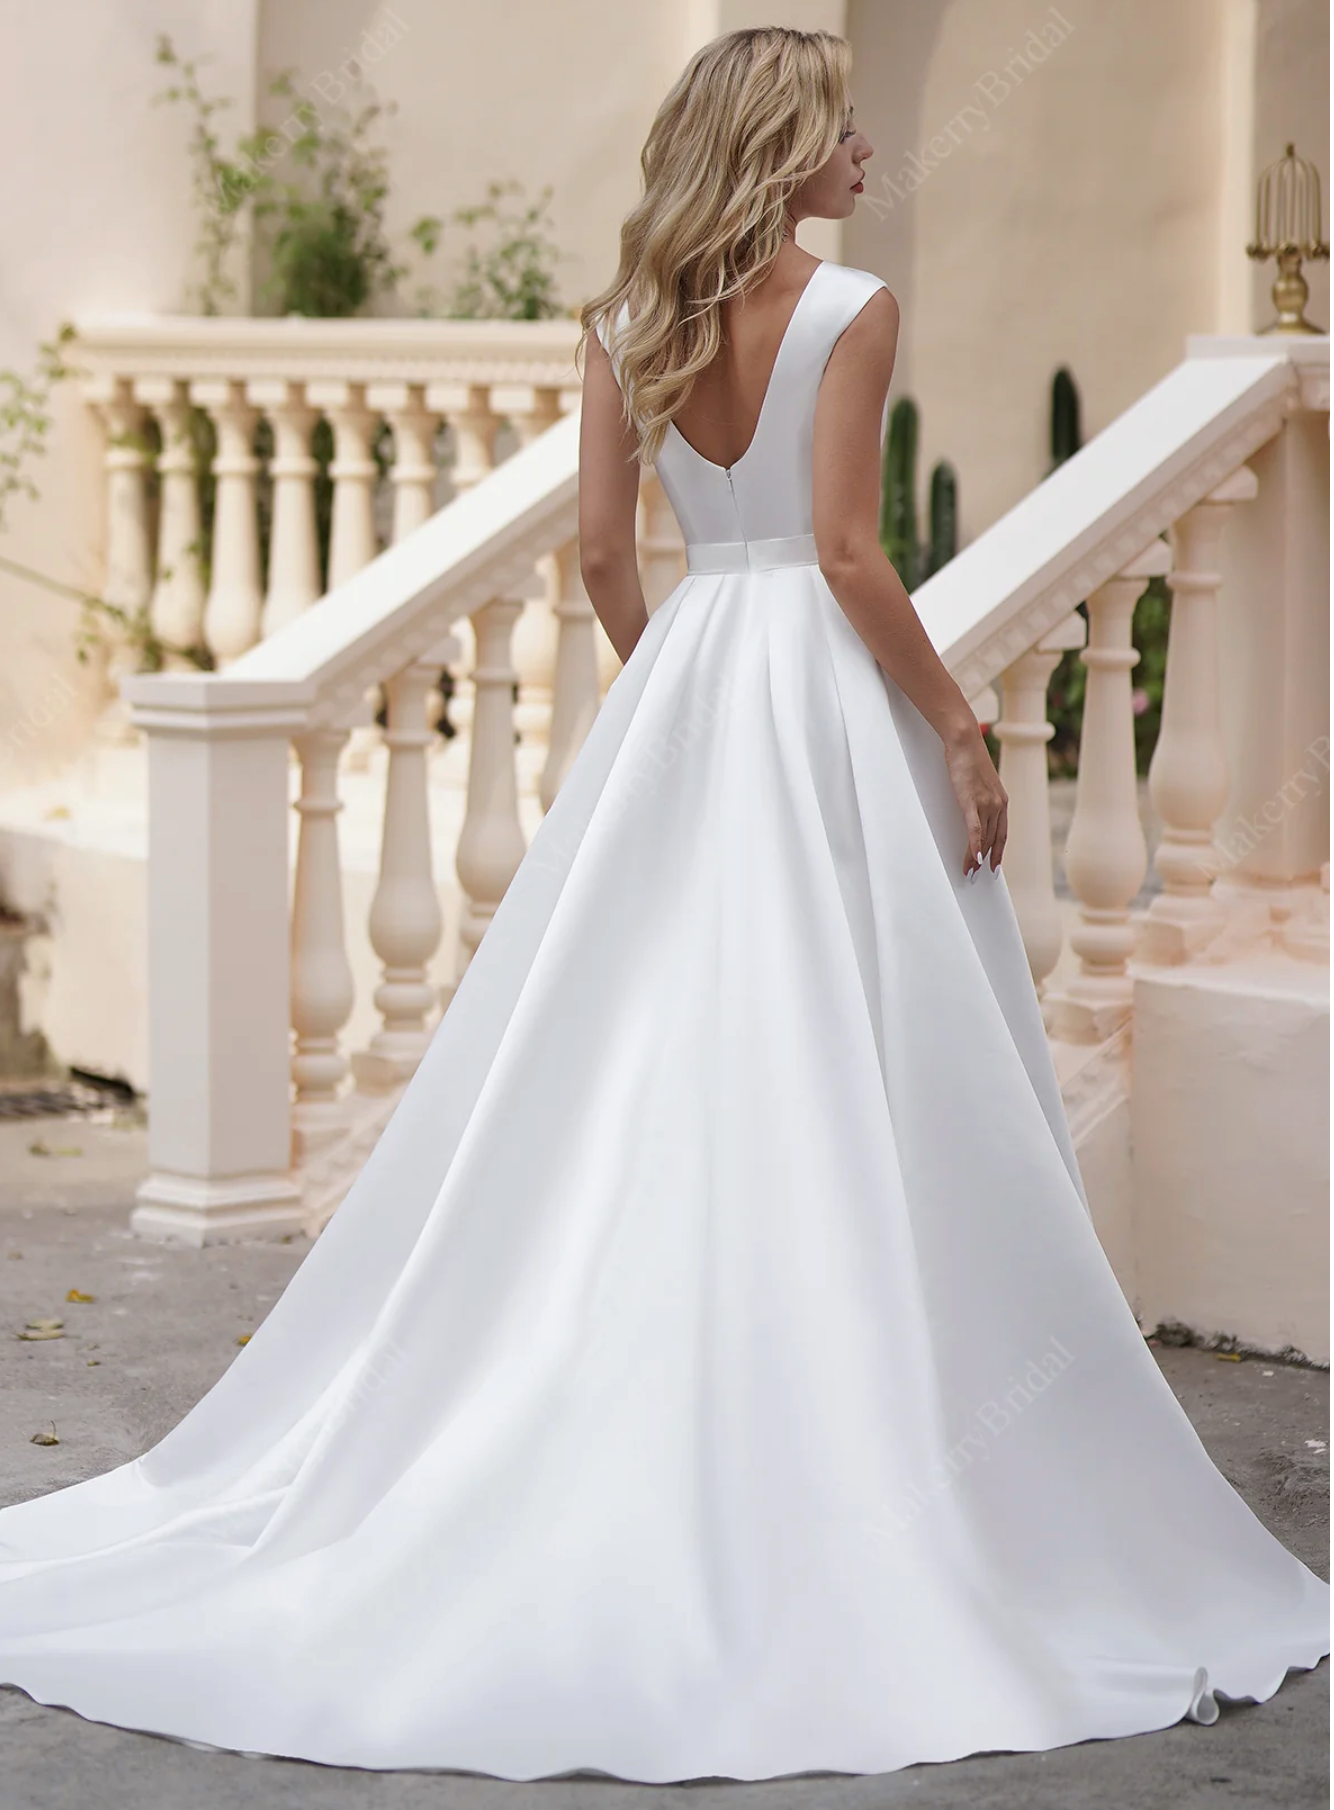 Satin Wedding Dresses: 15 Classic and Chic Silhouettes | Wedding dresses  satin, Wedding dresses simple, Wedding dress guide